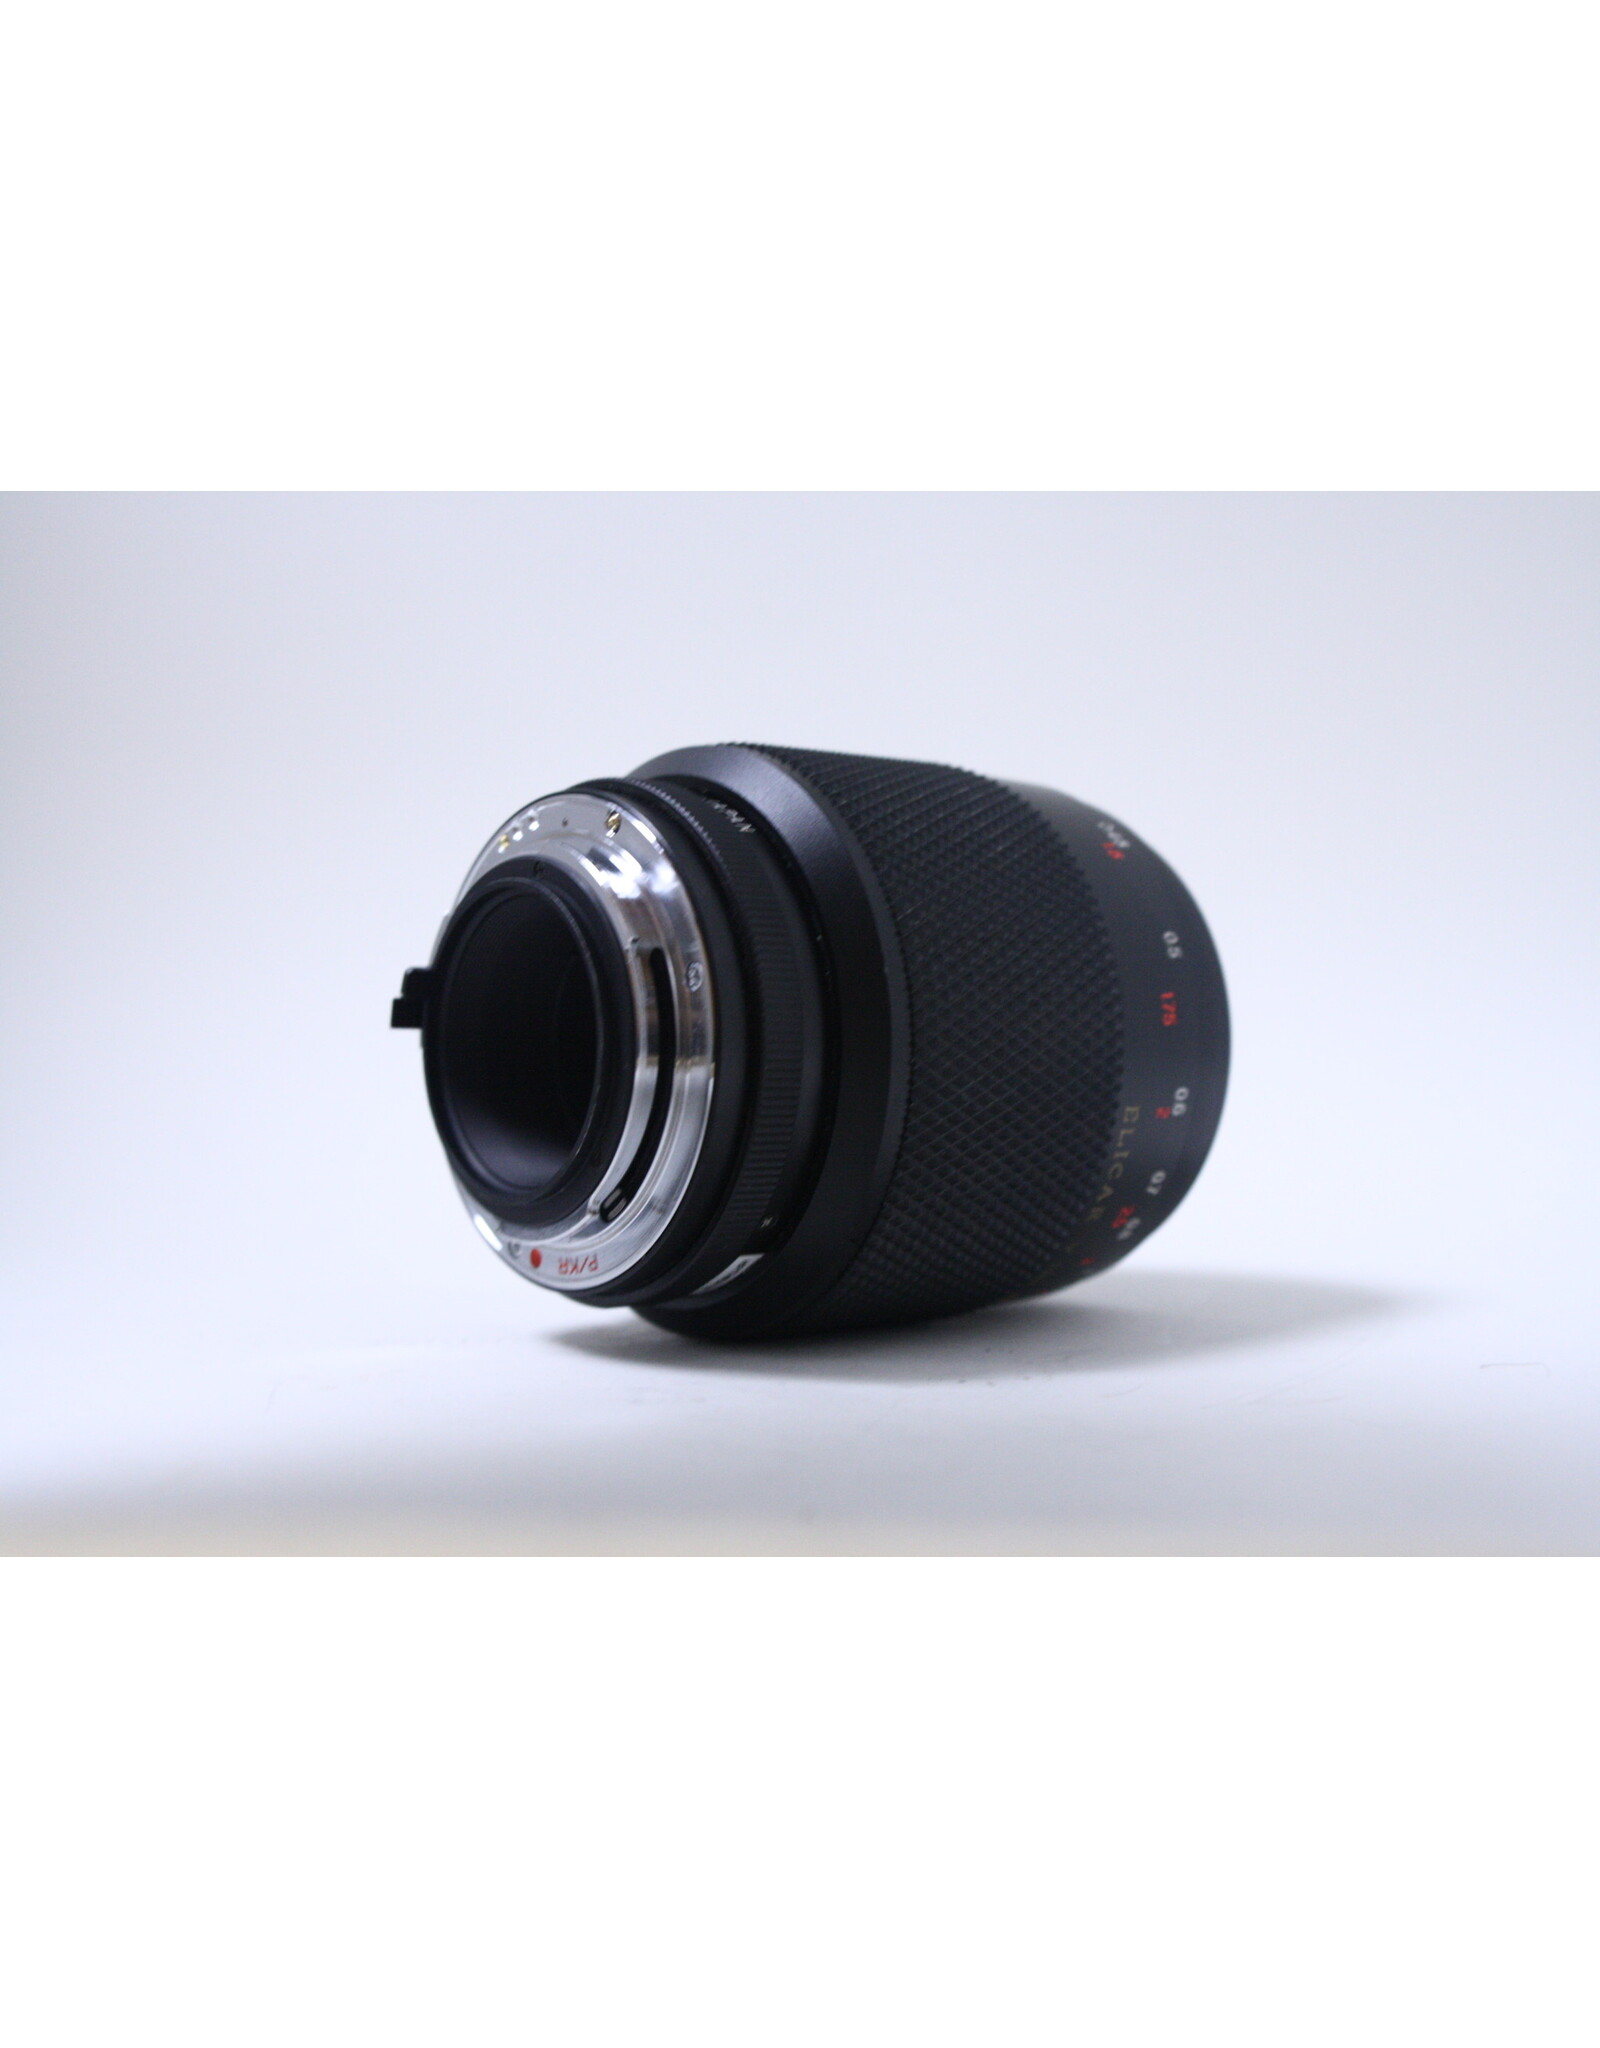 ELICAR V-HQ Macro MC 90mm f2.5 Ф62mm MF Lens for PKA (Pre-owned)